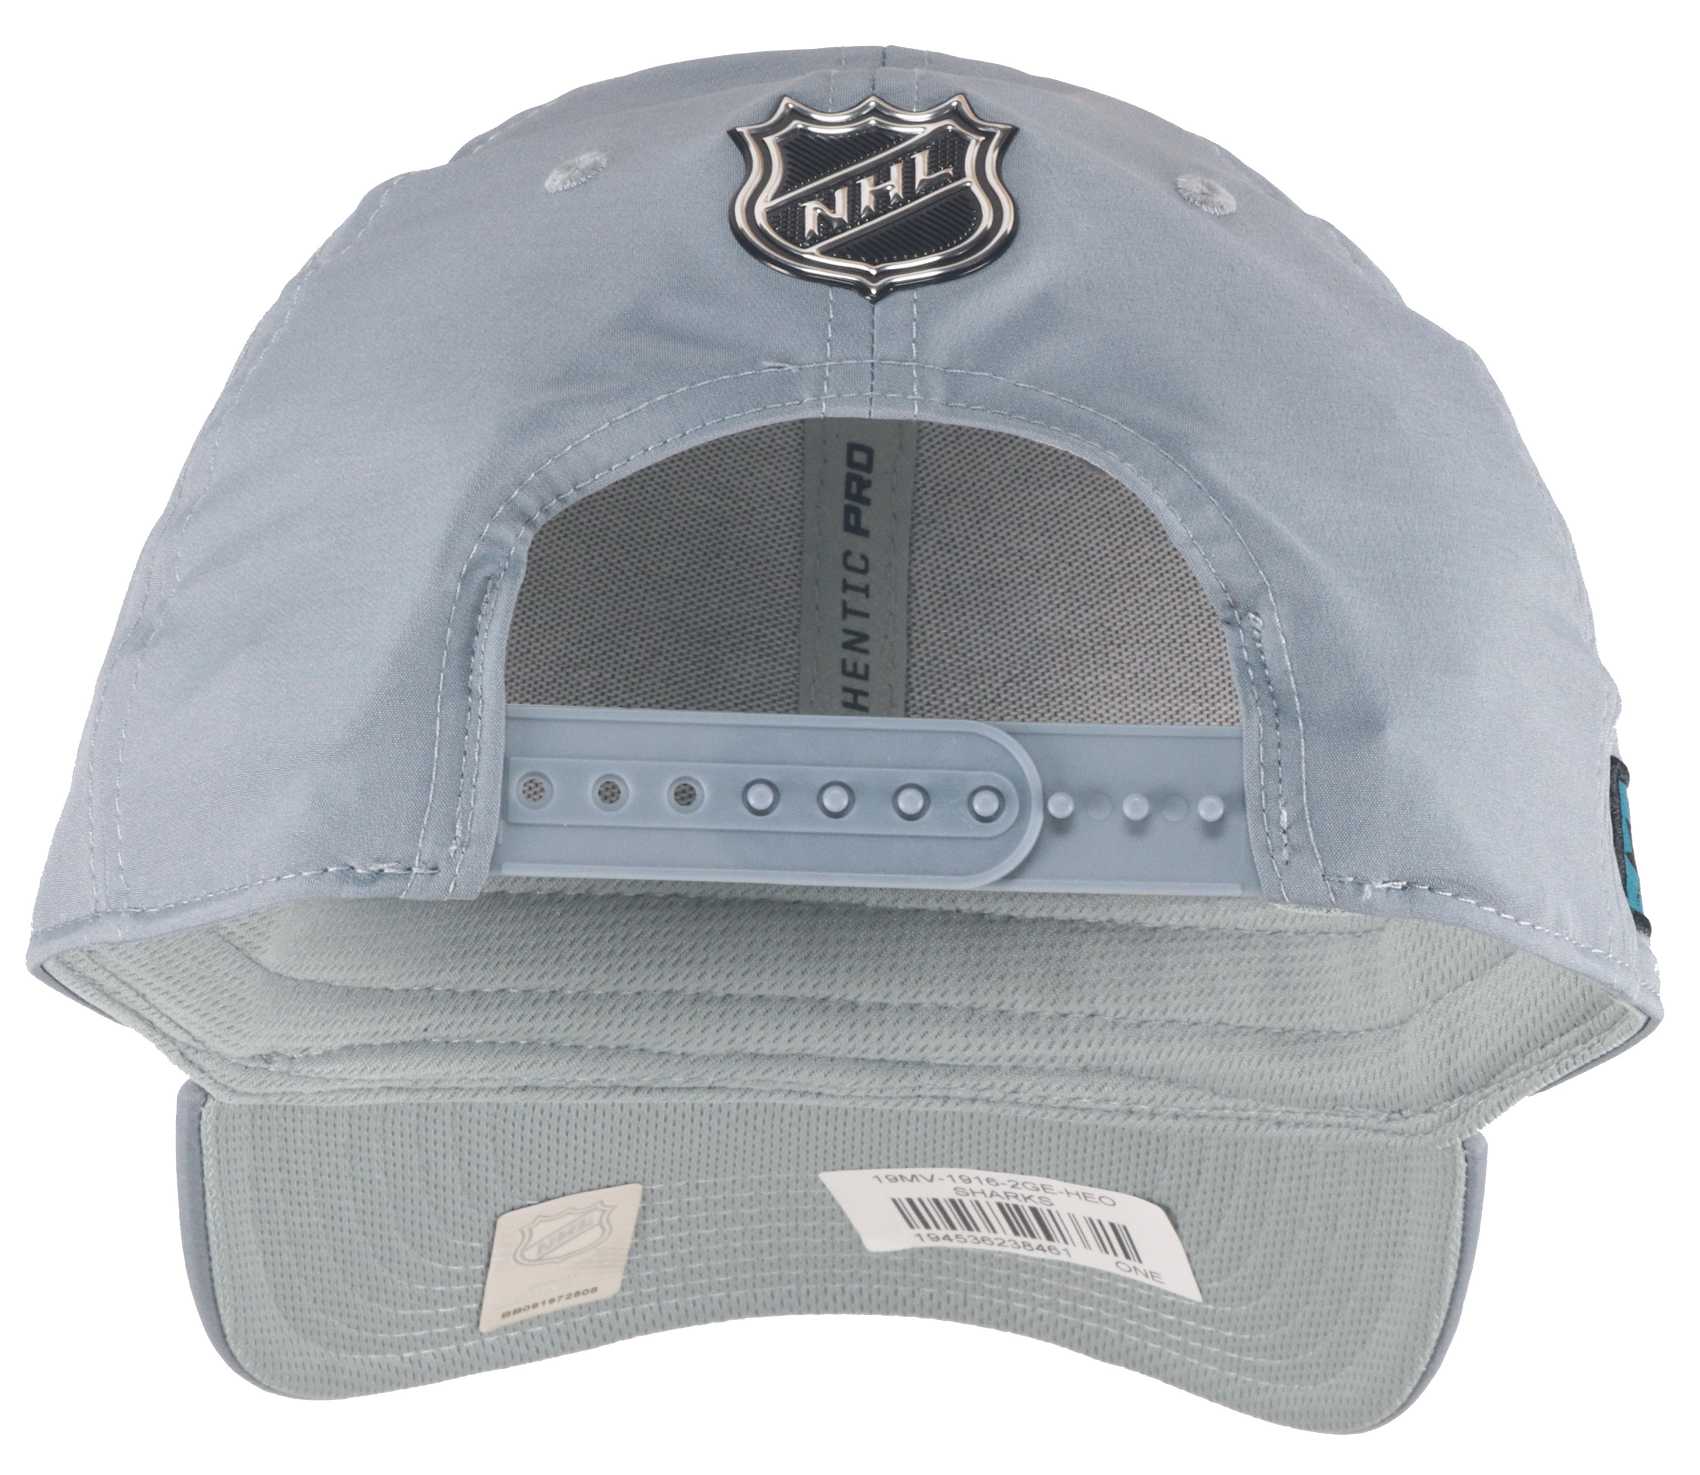 San Jose Sharks NHL Authentic Pro Home Ice Structured Curved Snapback Cap Grey Fanatics